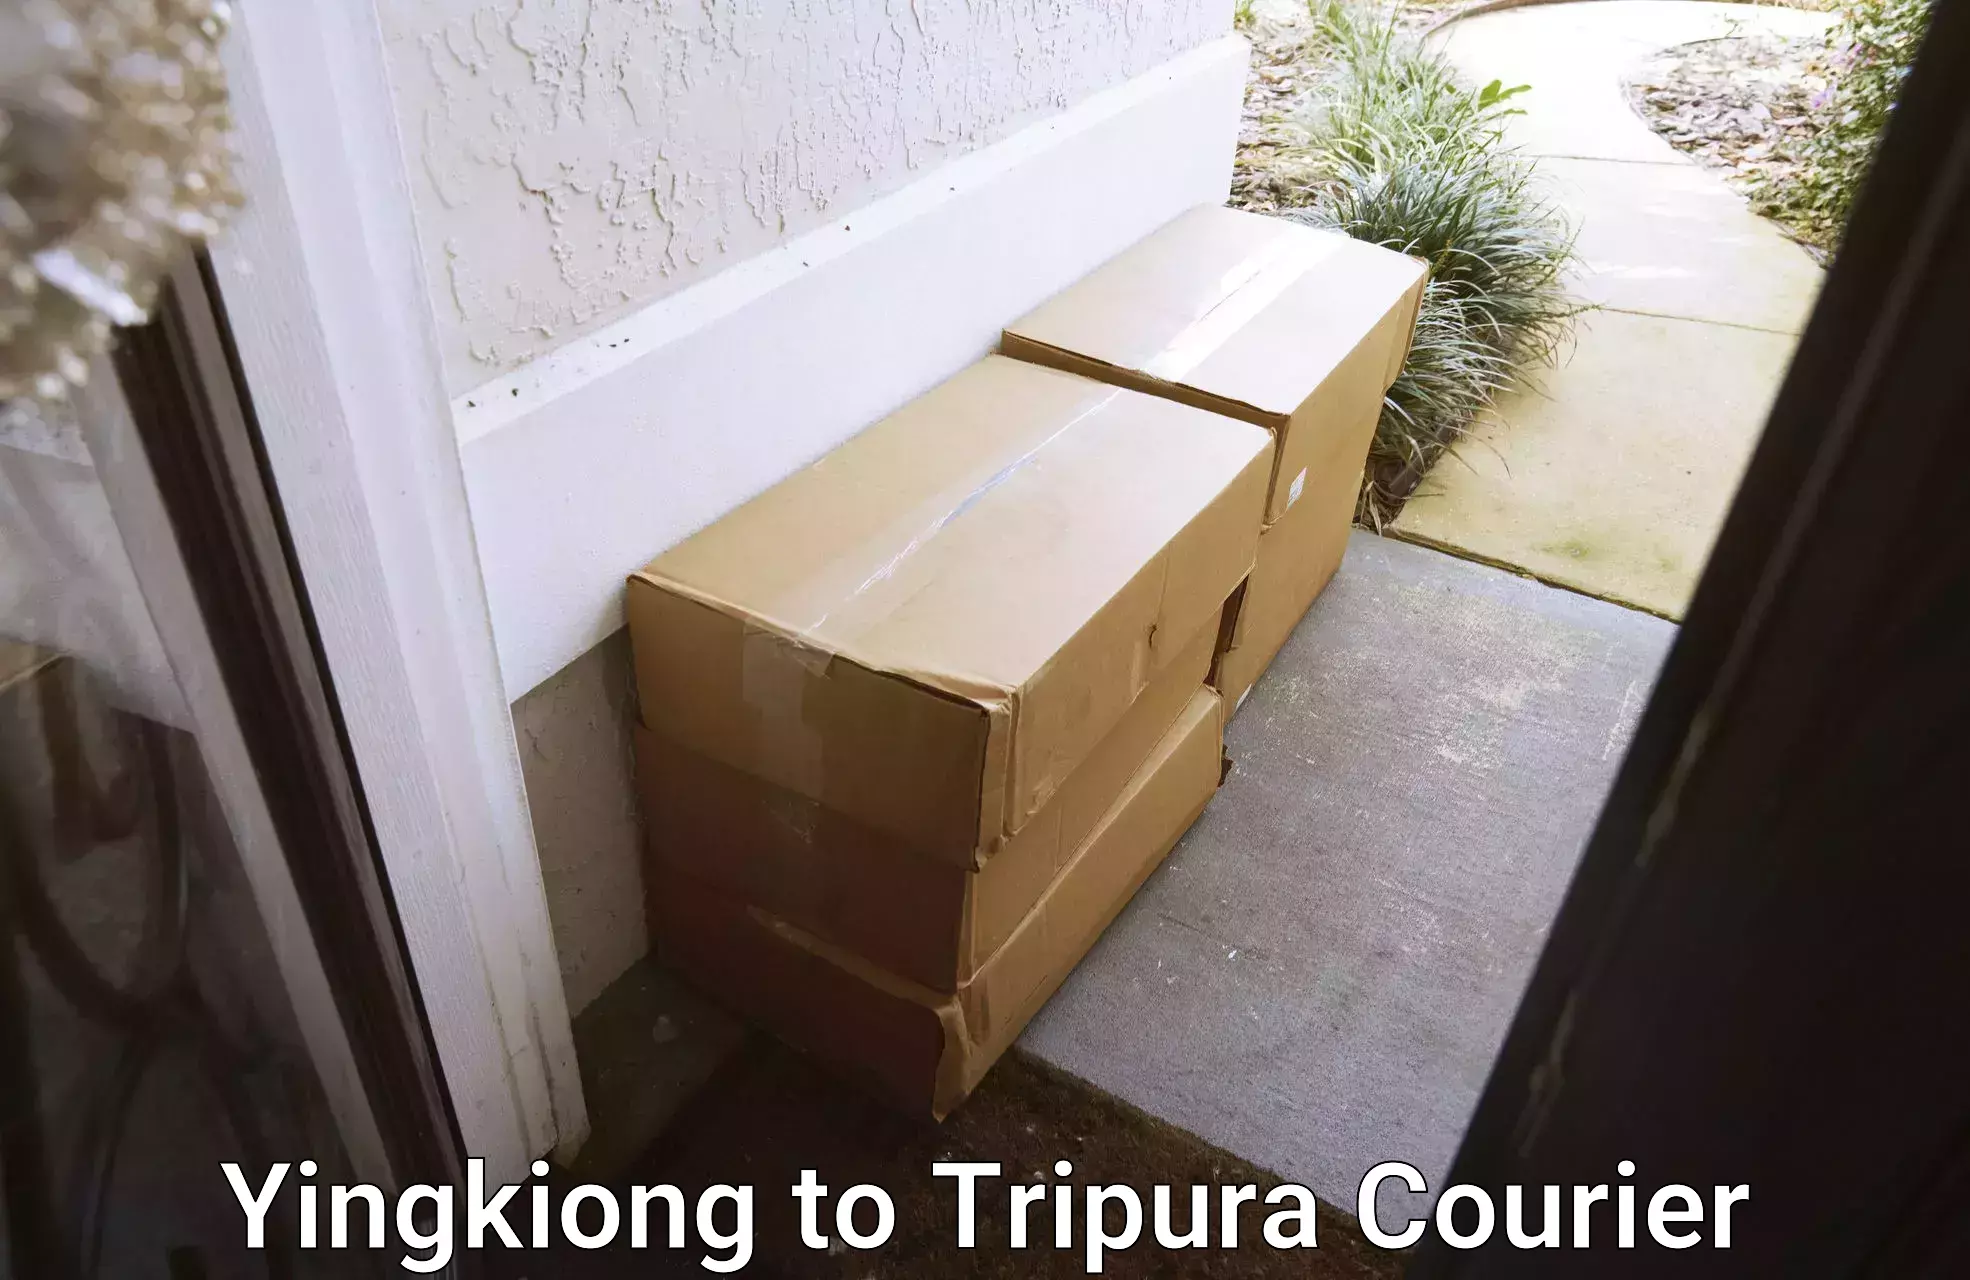 Courier app Yingkiong to Udaipur Tripura